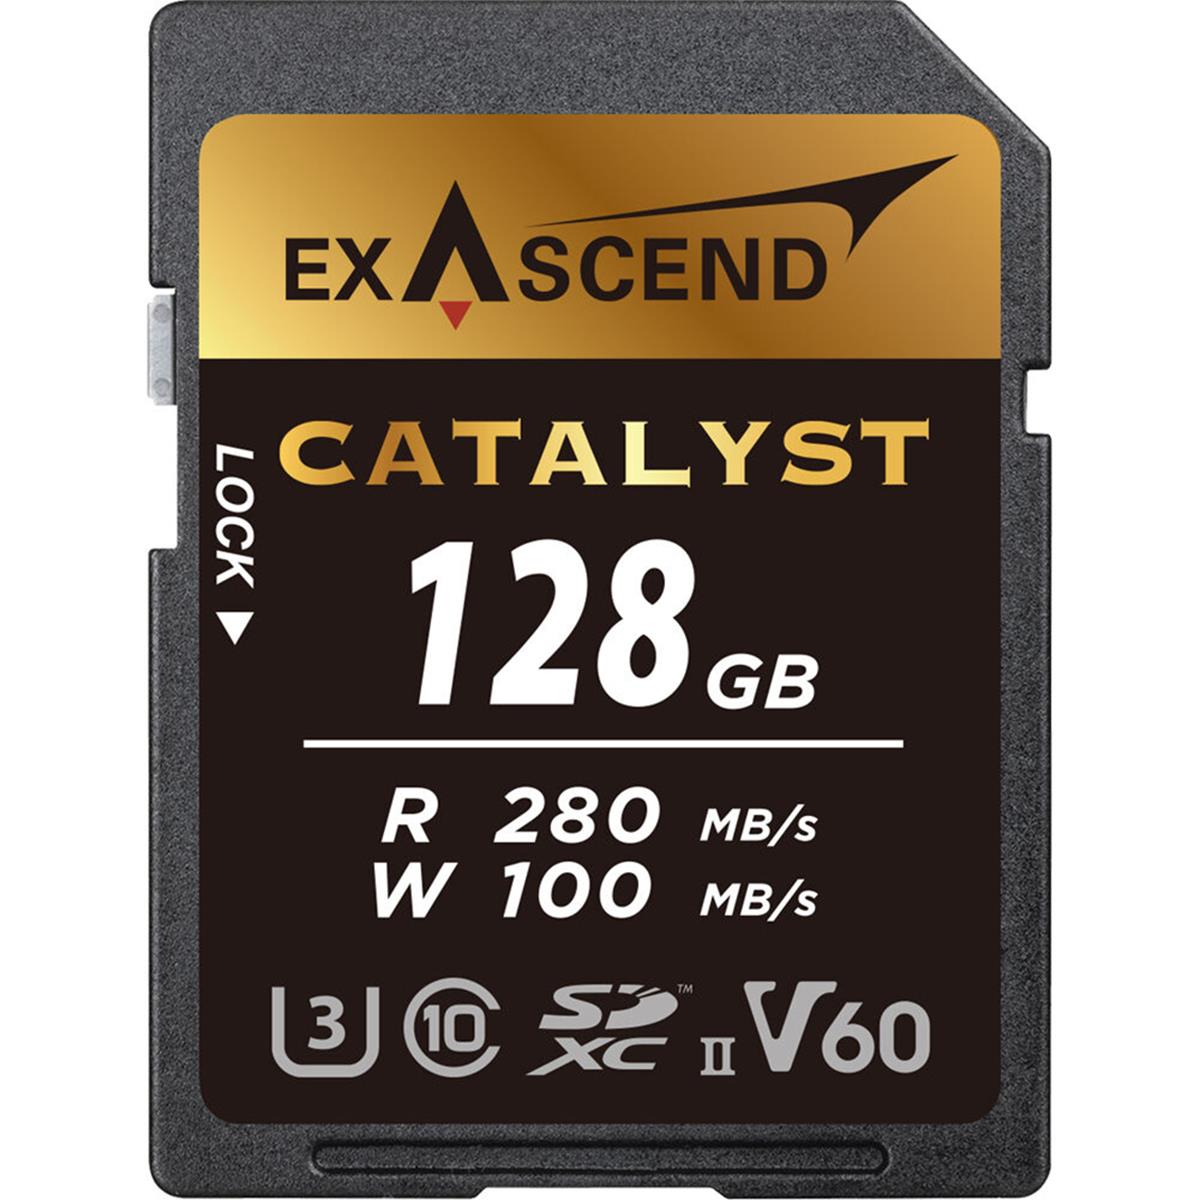 Image of Exascend 128GB Catalyst UHS-II V60 SDXC Memory Card